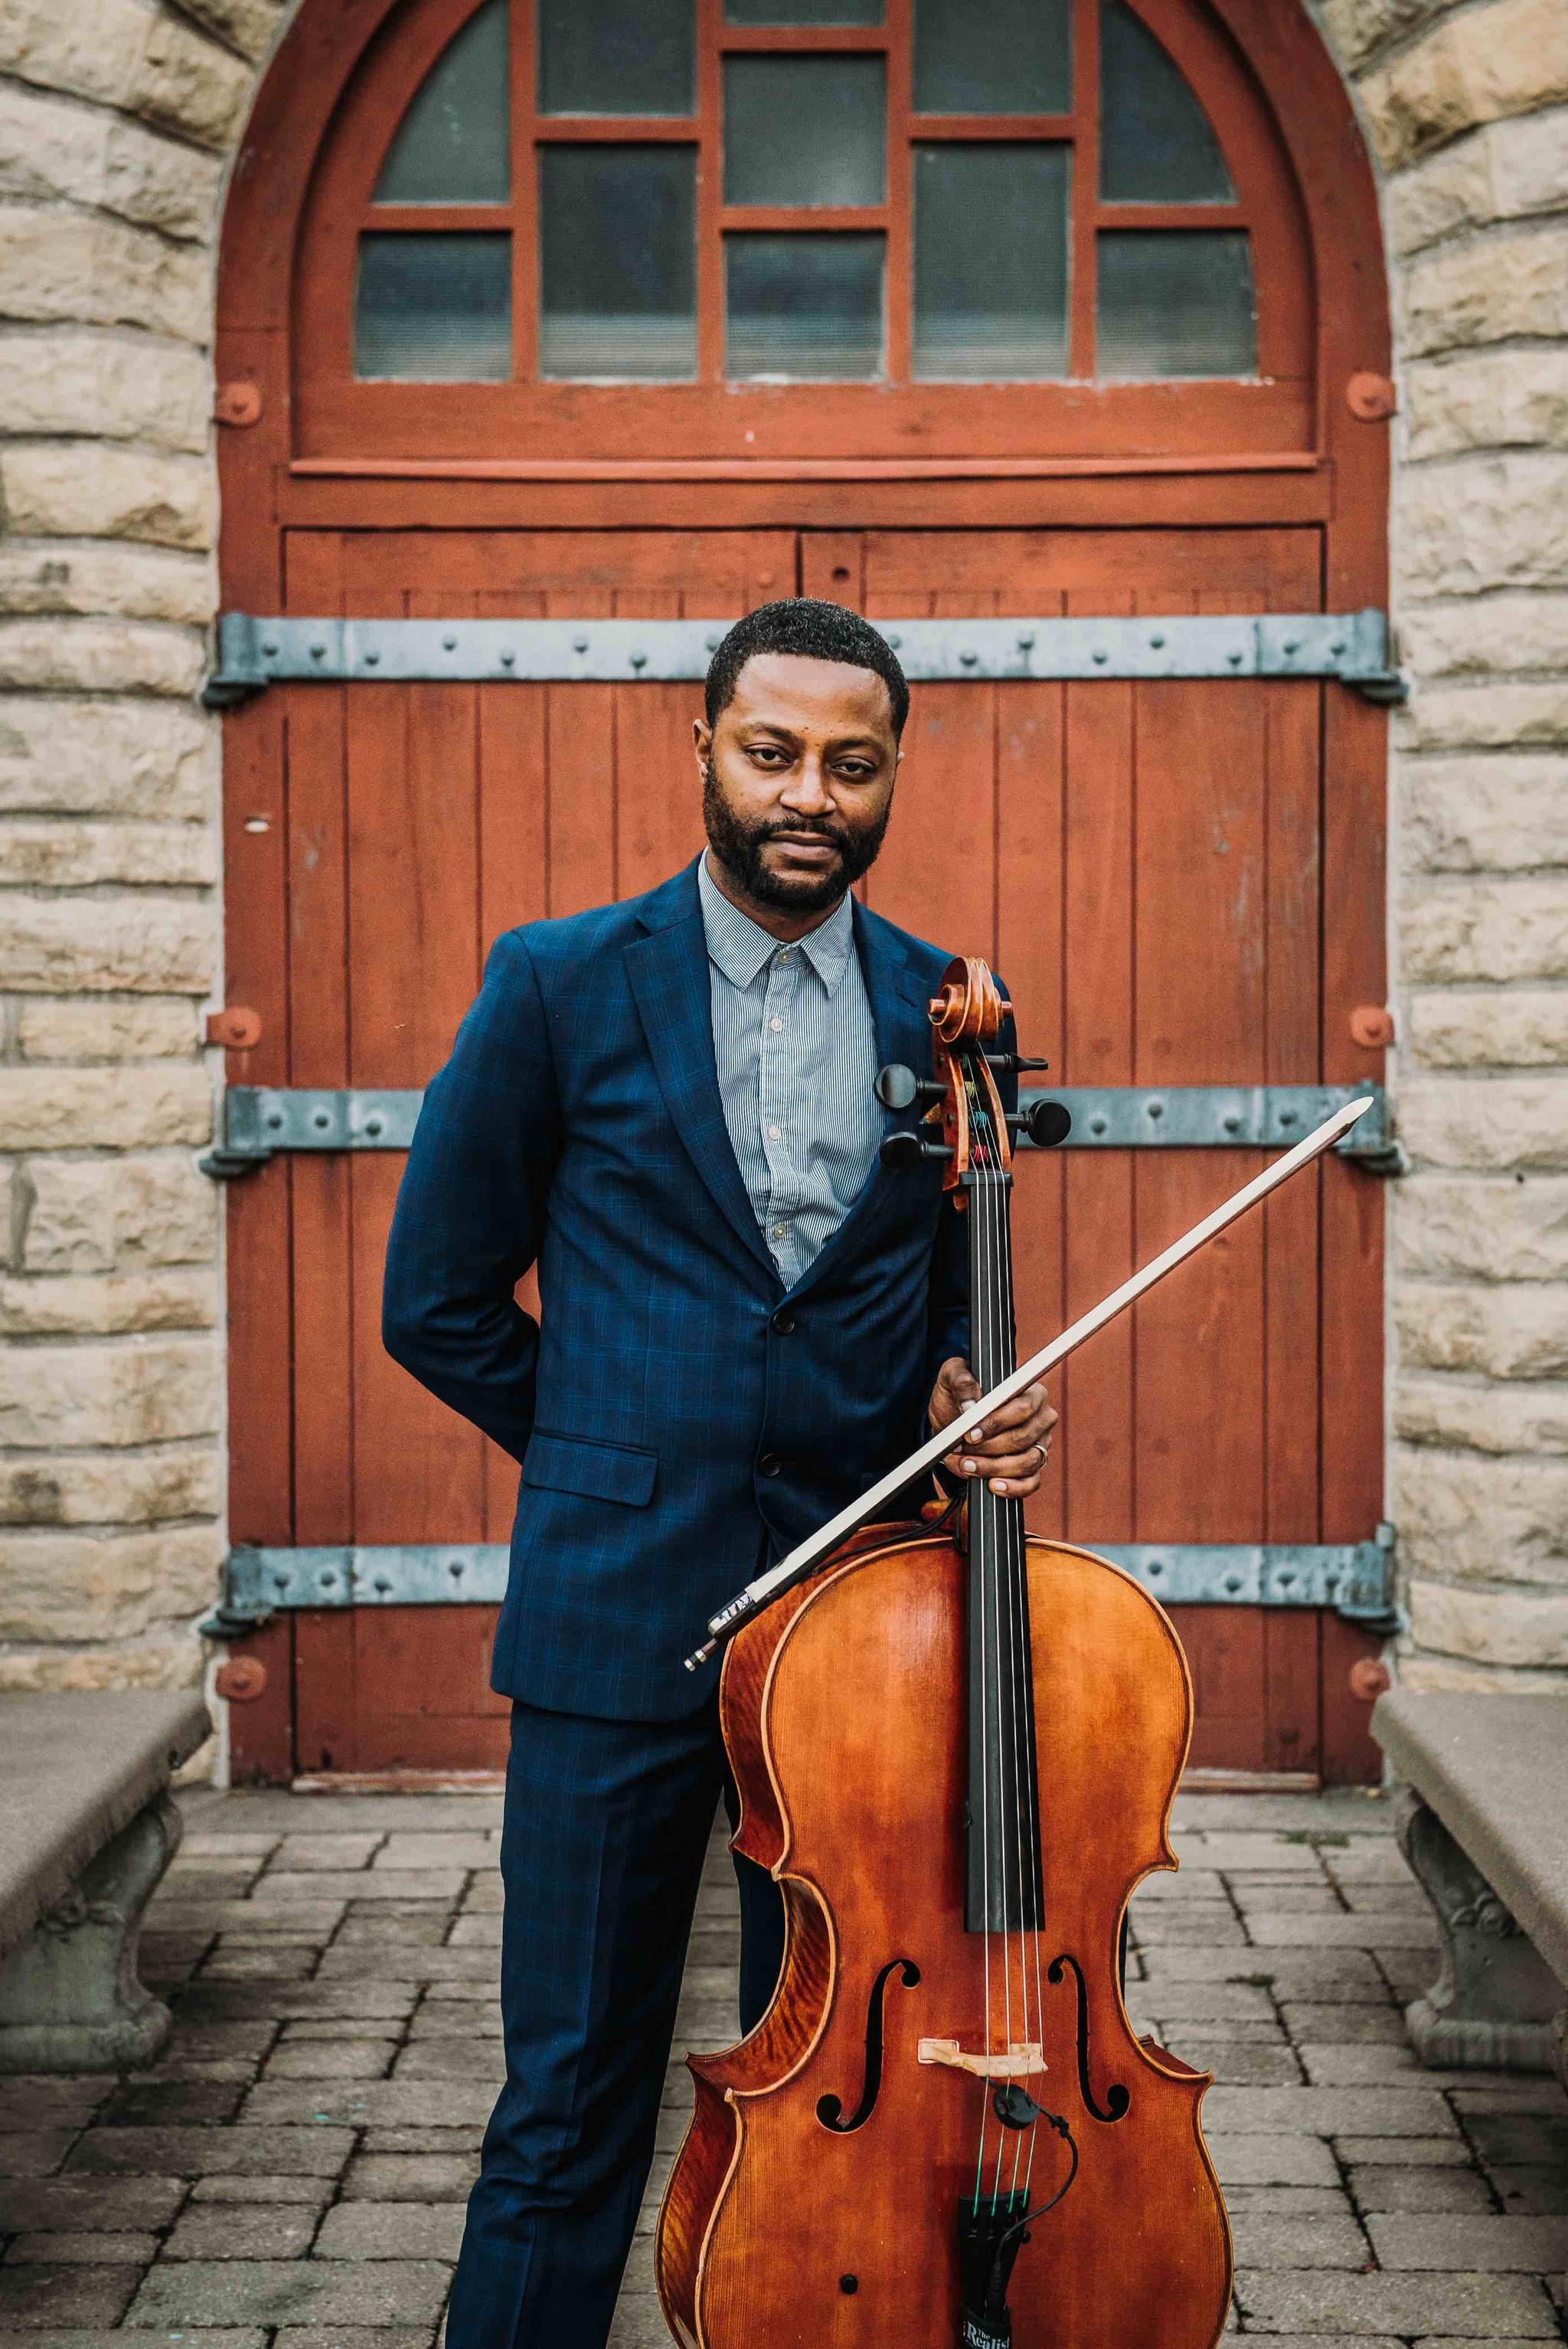 A Black man in a blue suit standing with a cello and bow in front of wooden doors topped by windows in an archway. 